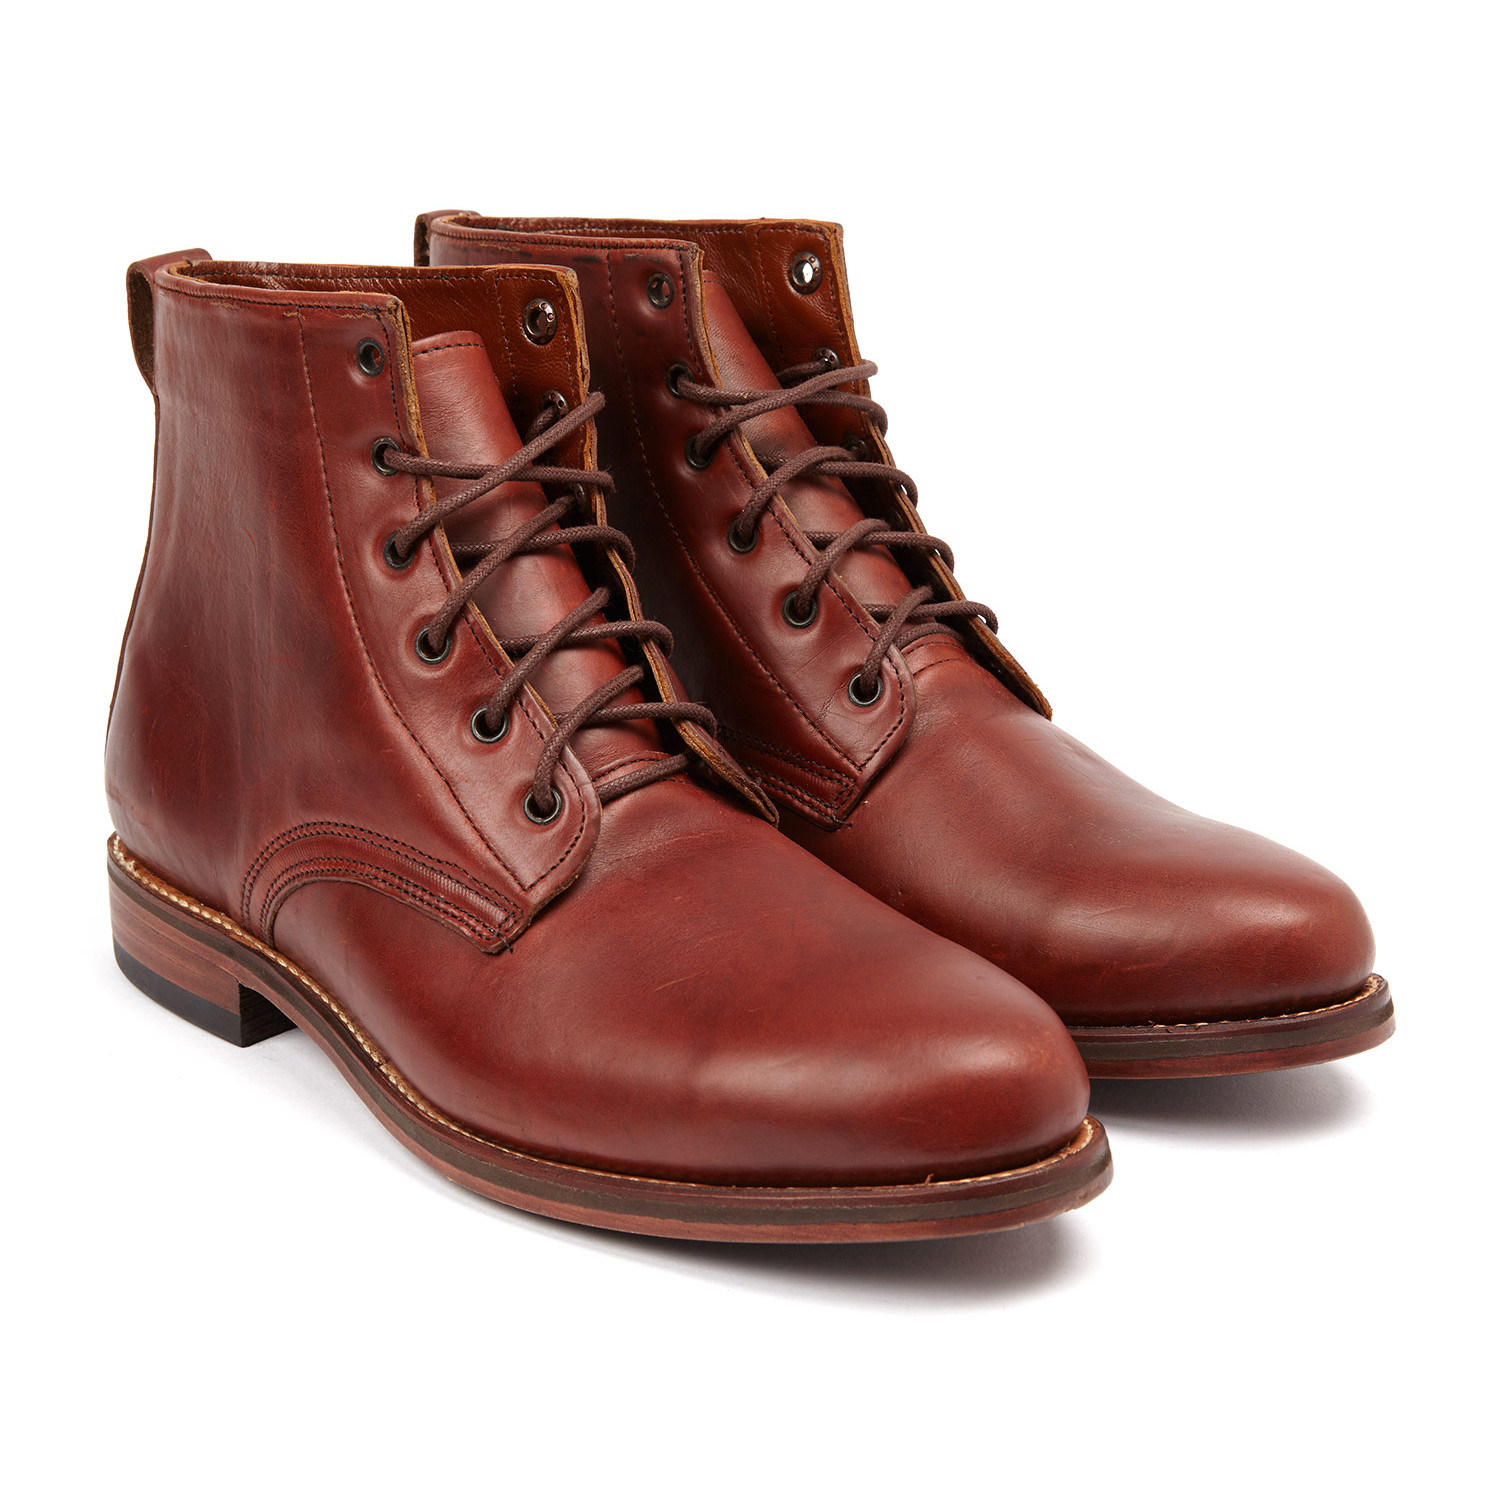 chromexcel leather boots